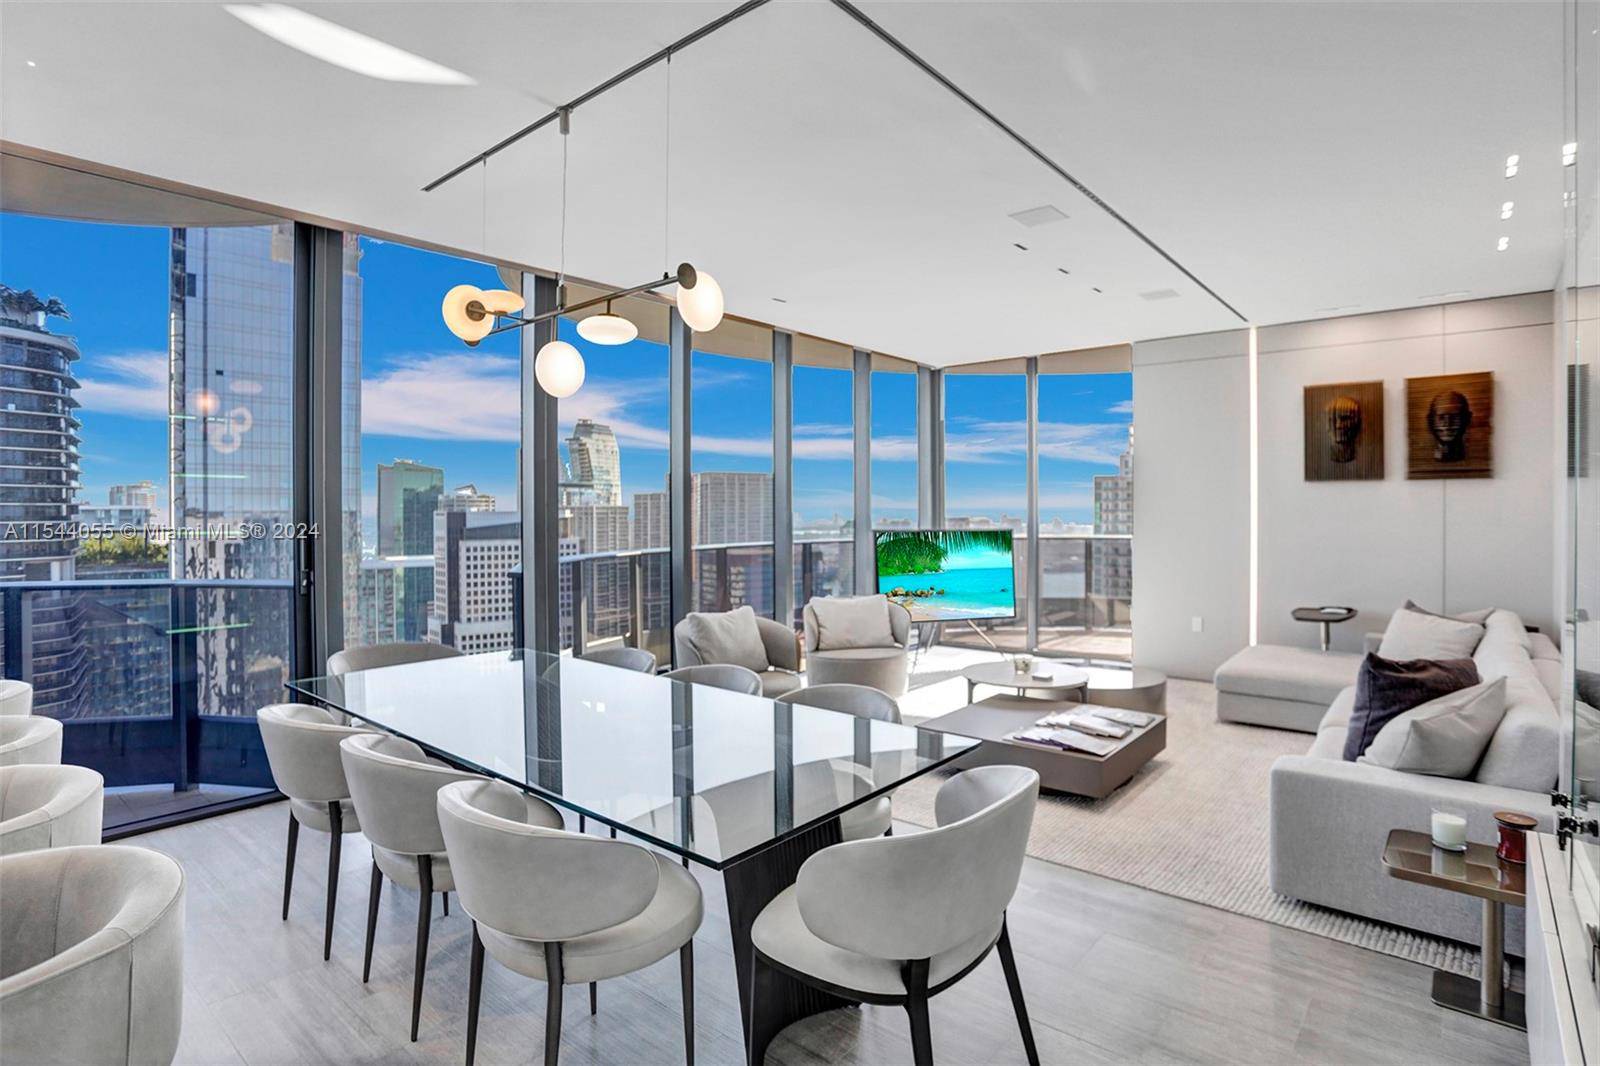 Welcome to this corner penthouse residence, boasting breathtaking views of the city skyline and the bay.